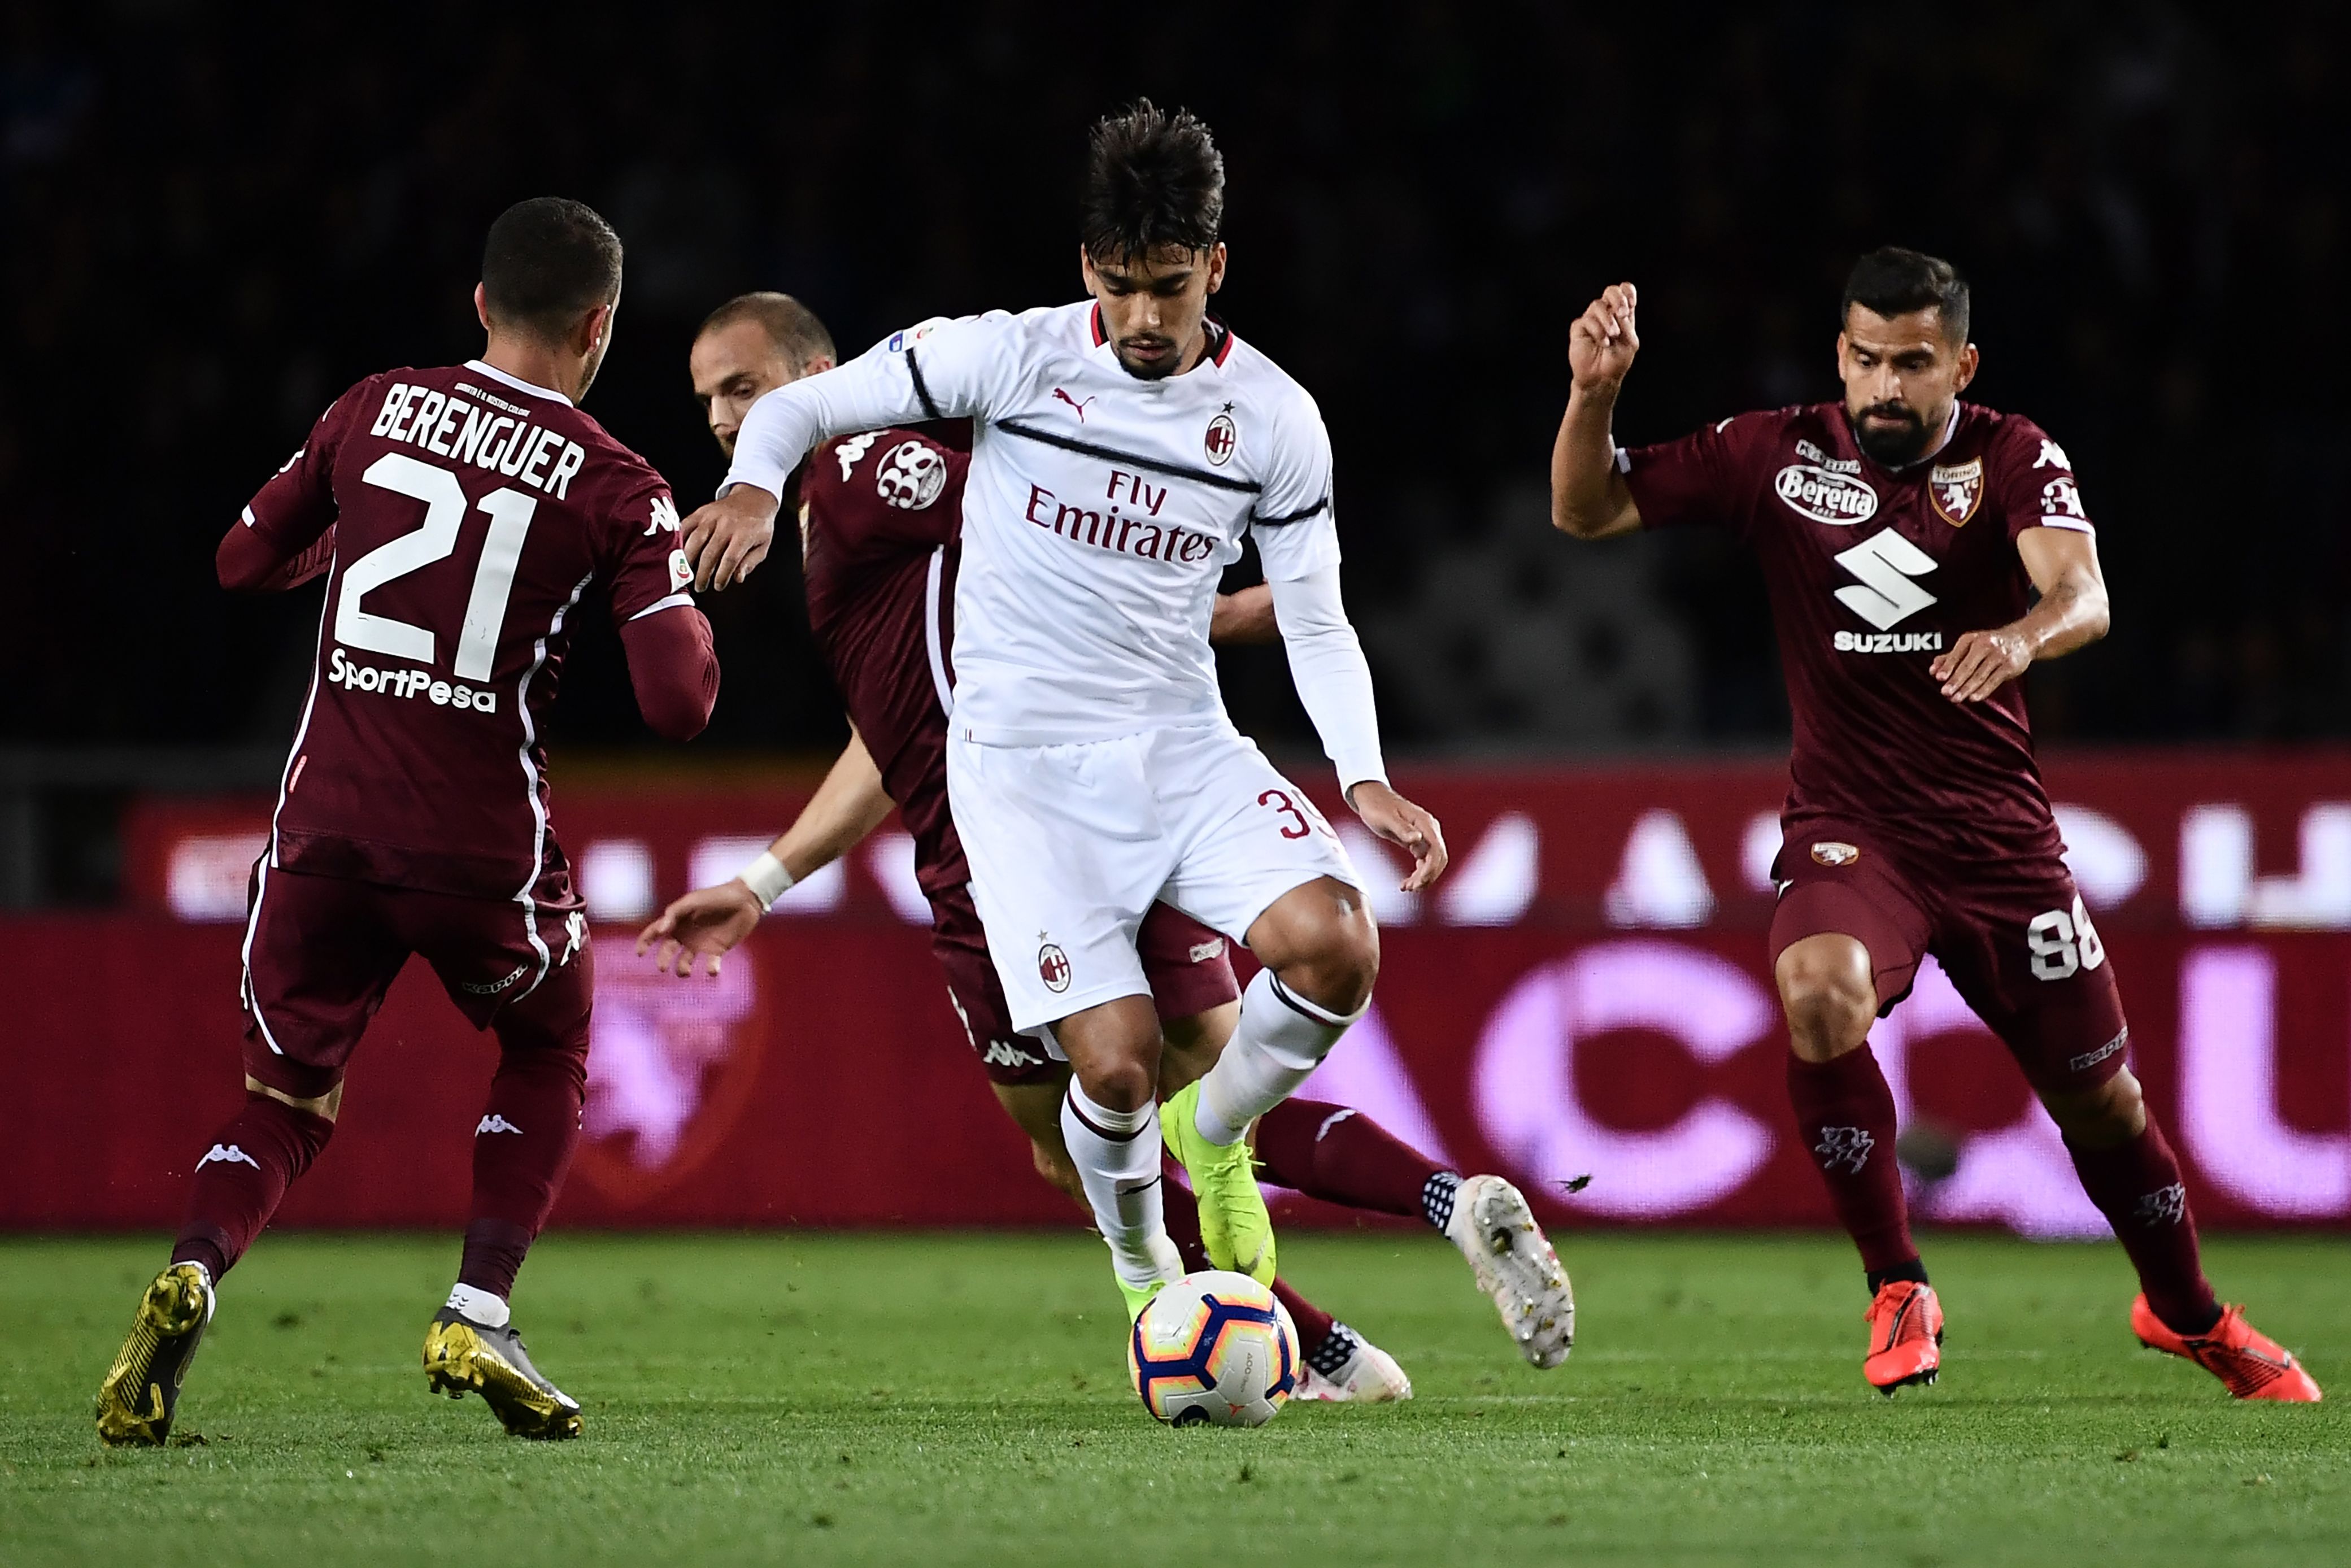 AC Milan's Brazilian midfielder Lucas Paqueta (C) fights for the ball with Torino's Spanish forward Alejandro Berenguer (L) during the Italian Serie A football match between Torino and AC Milan on April 28, 2019 at the Grande Torino stadium in Turin. (Photo by MARCO BERTORELLO / AFP) (Photo credit should read MARCO BERTORELLO/AFP/Getty Images)